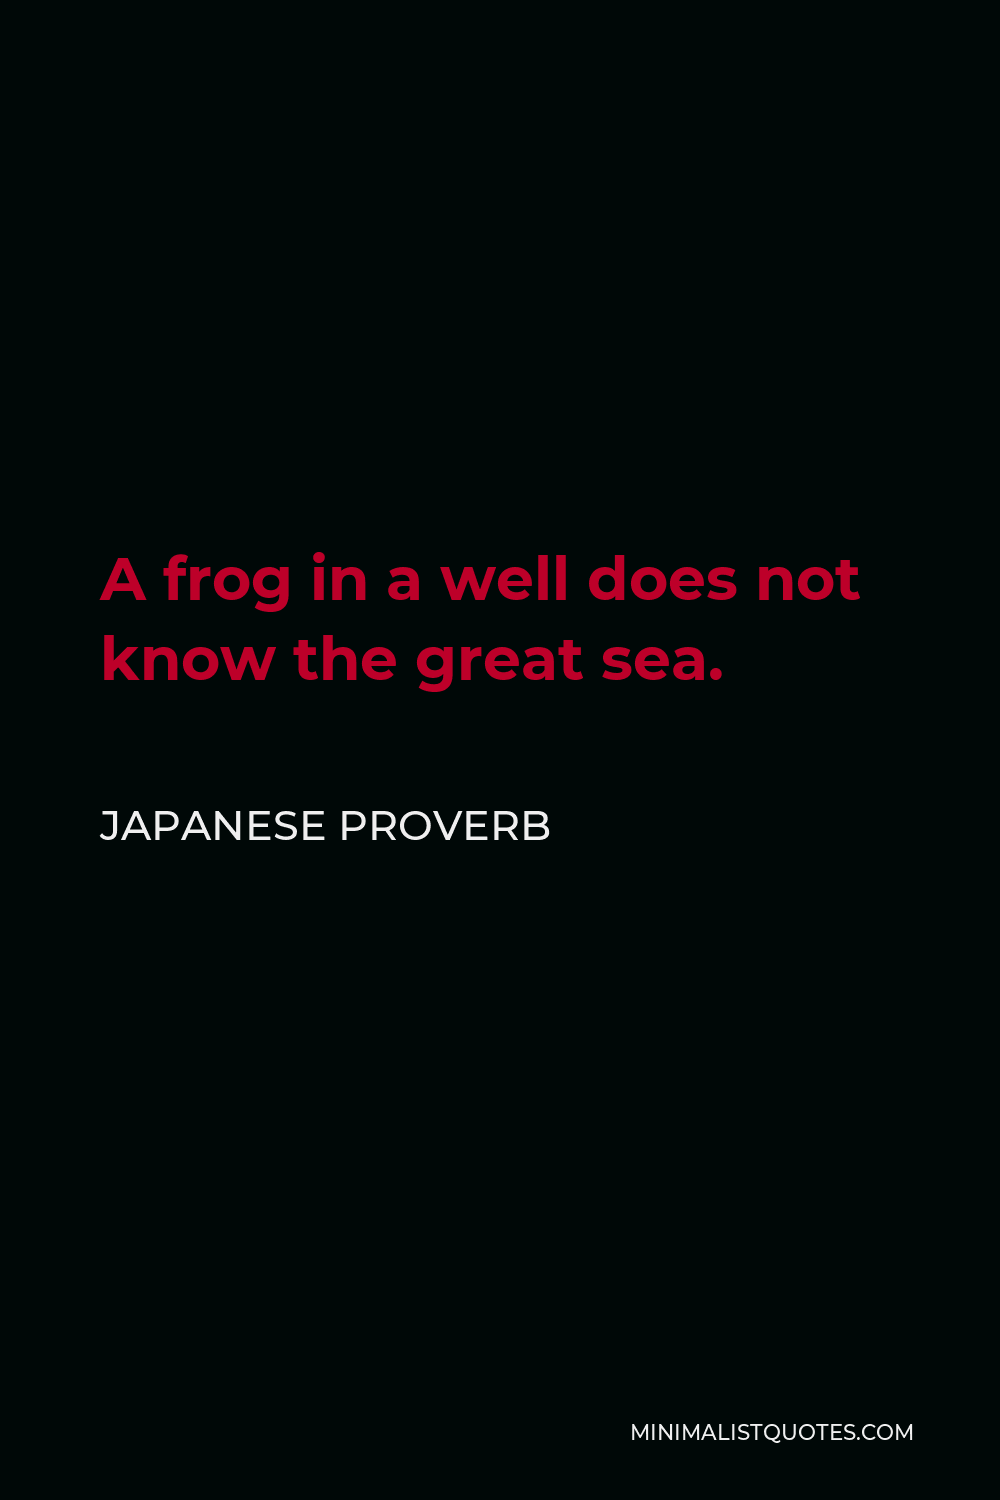 Japanese Proverb Quote - A frog in a well does not know the great sea.